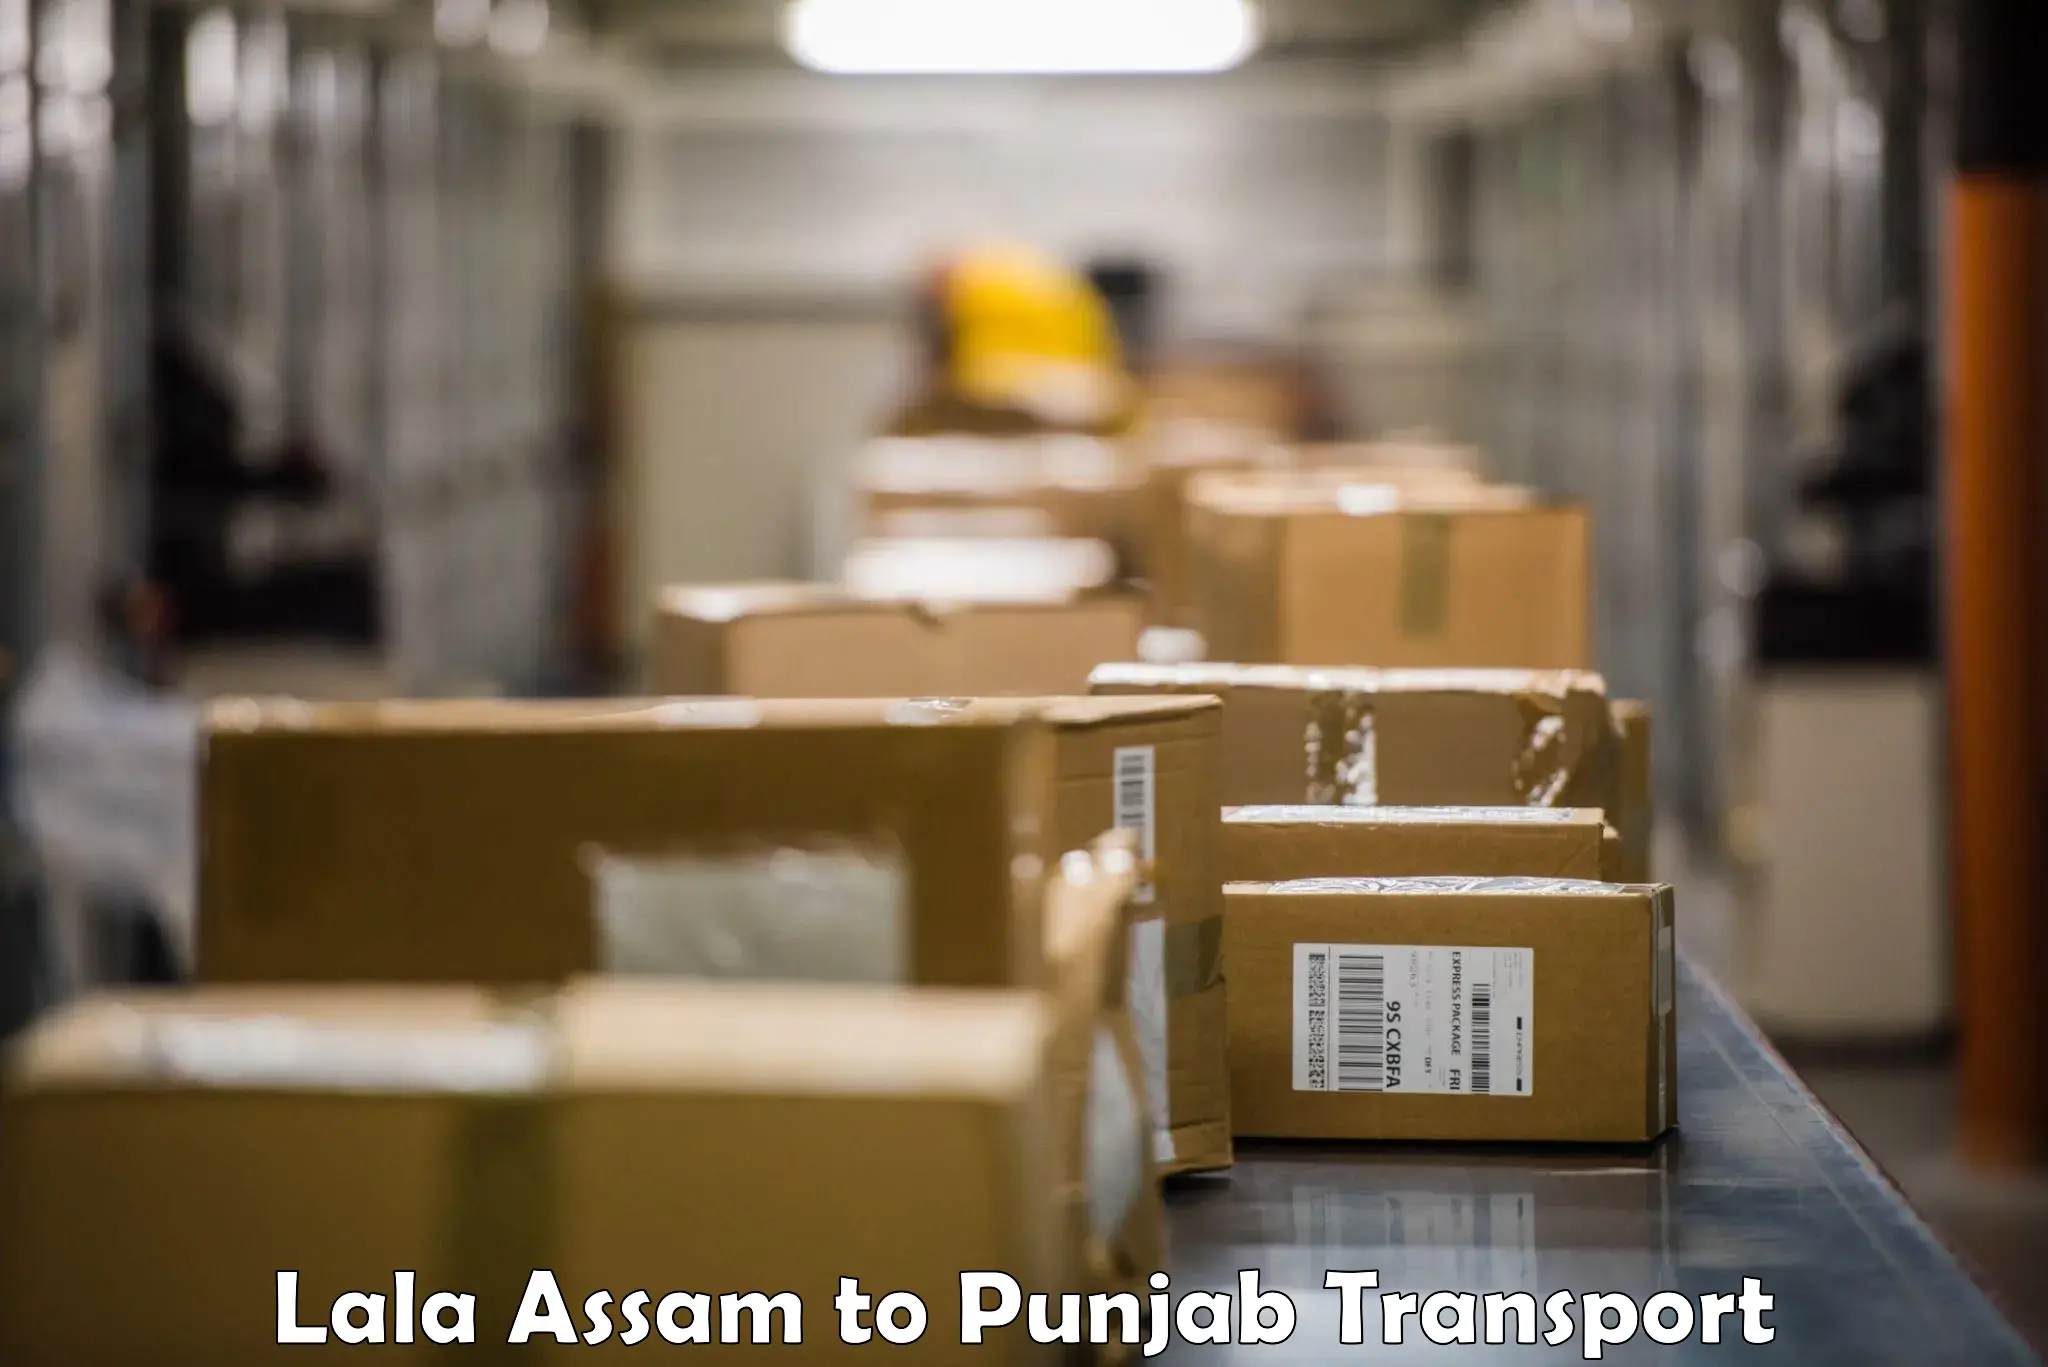 Goods delivery service Lala Assam to Nawanshahr